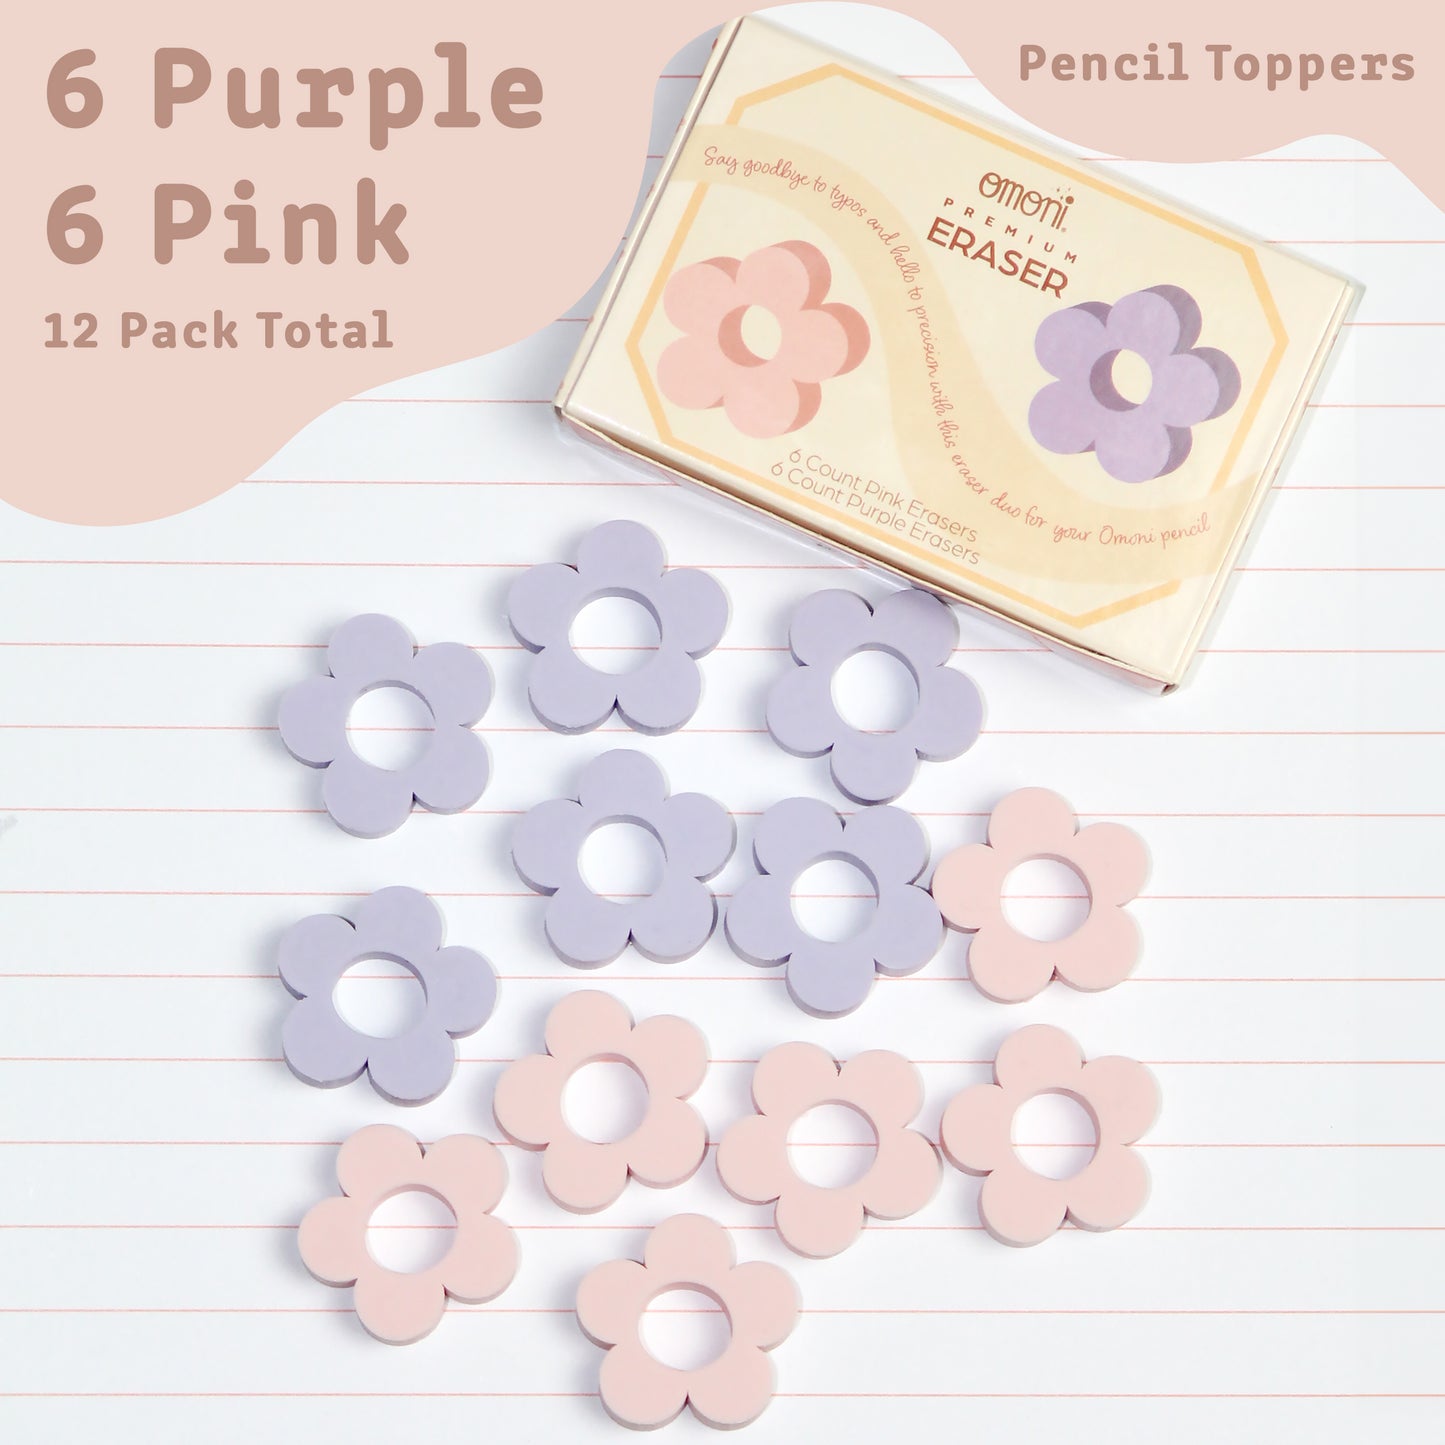 Daisy Pencil Top Pink & Purple Eraser 12 Pack